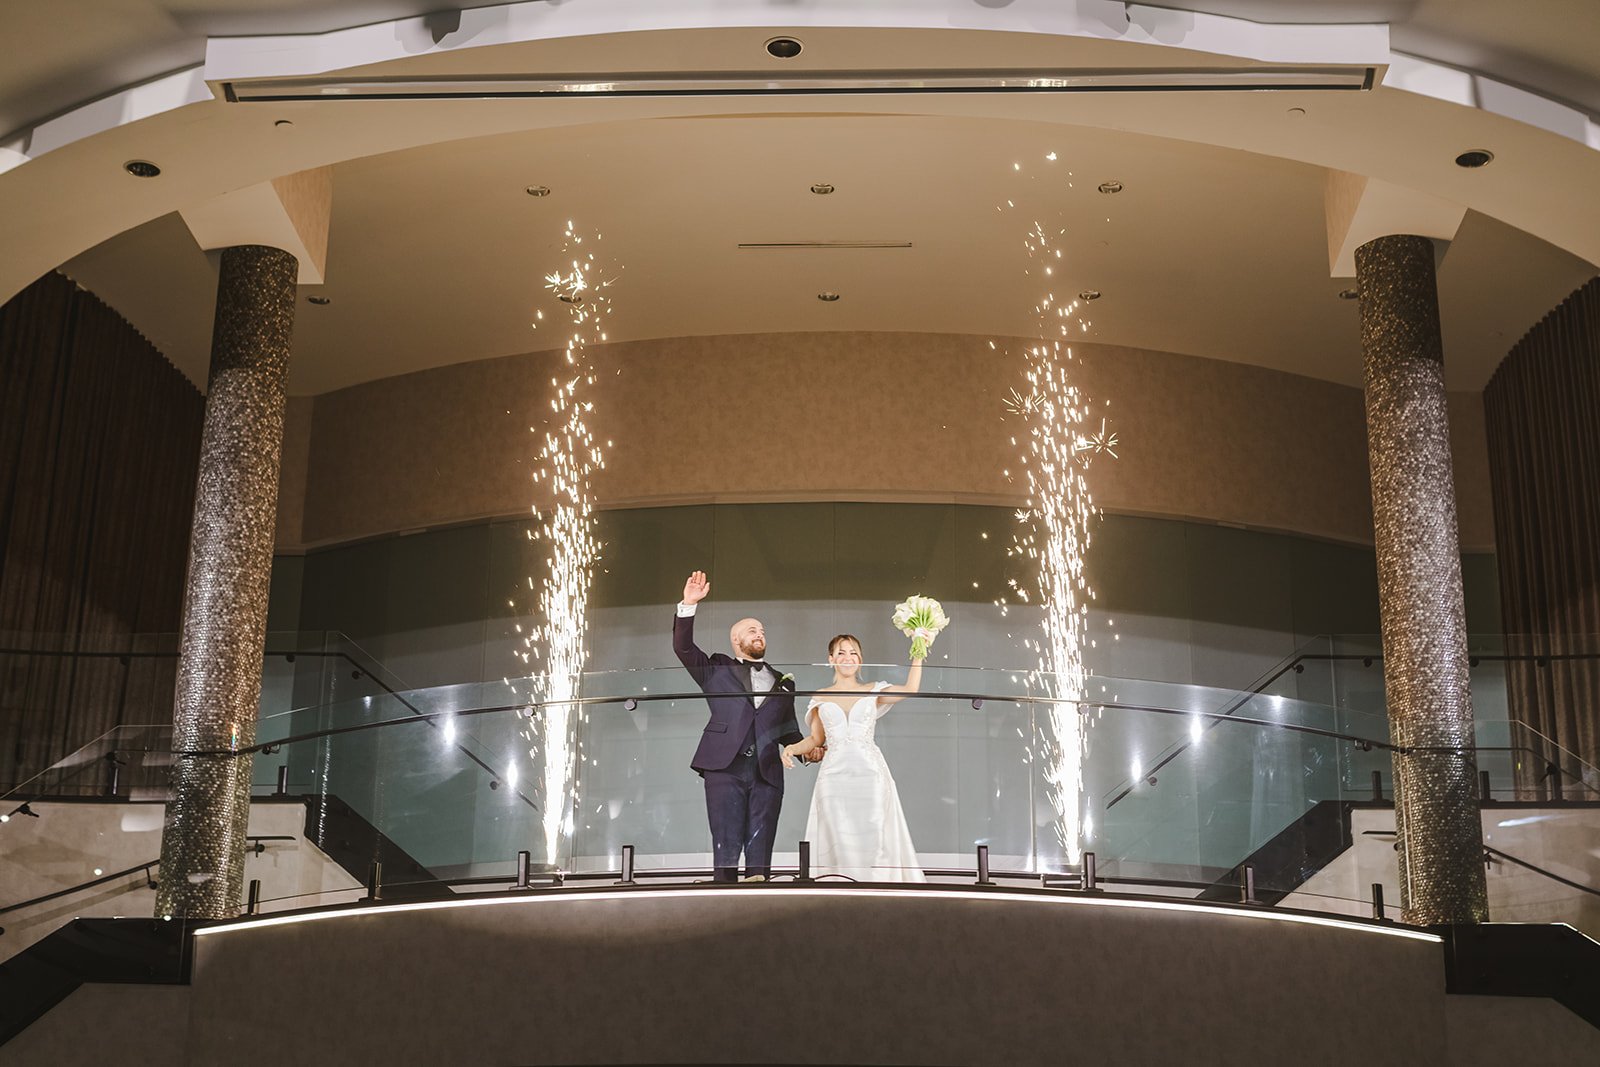 Wedding Grand Entrance with fireworks photo by Fedora Media